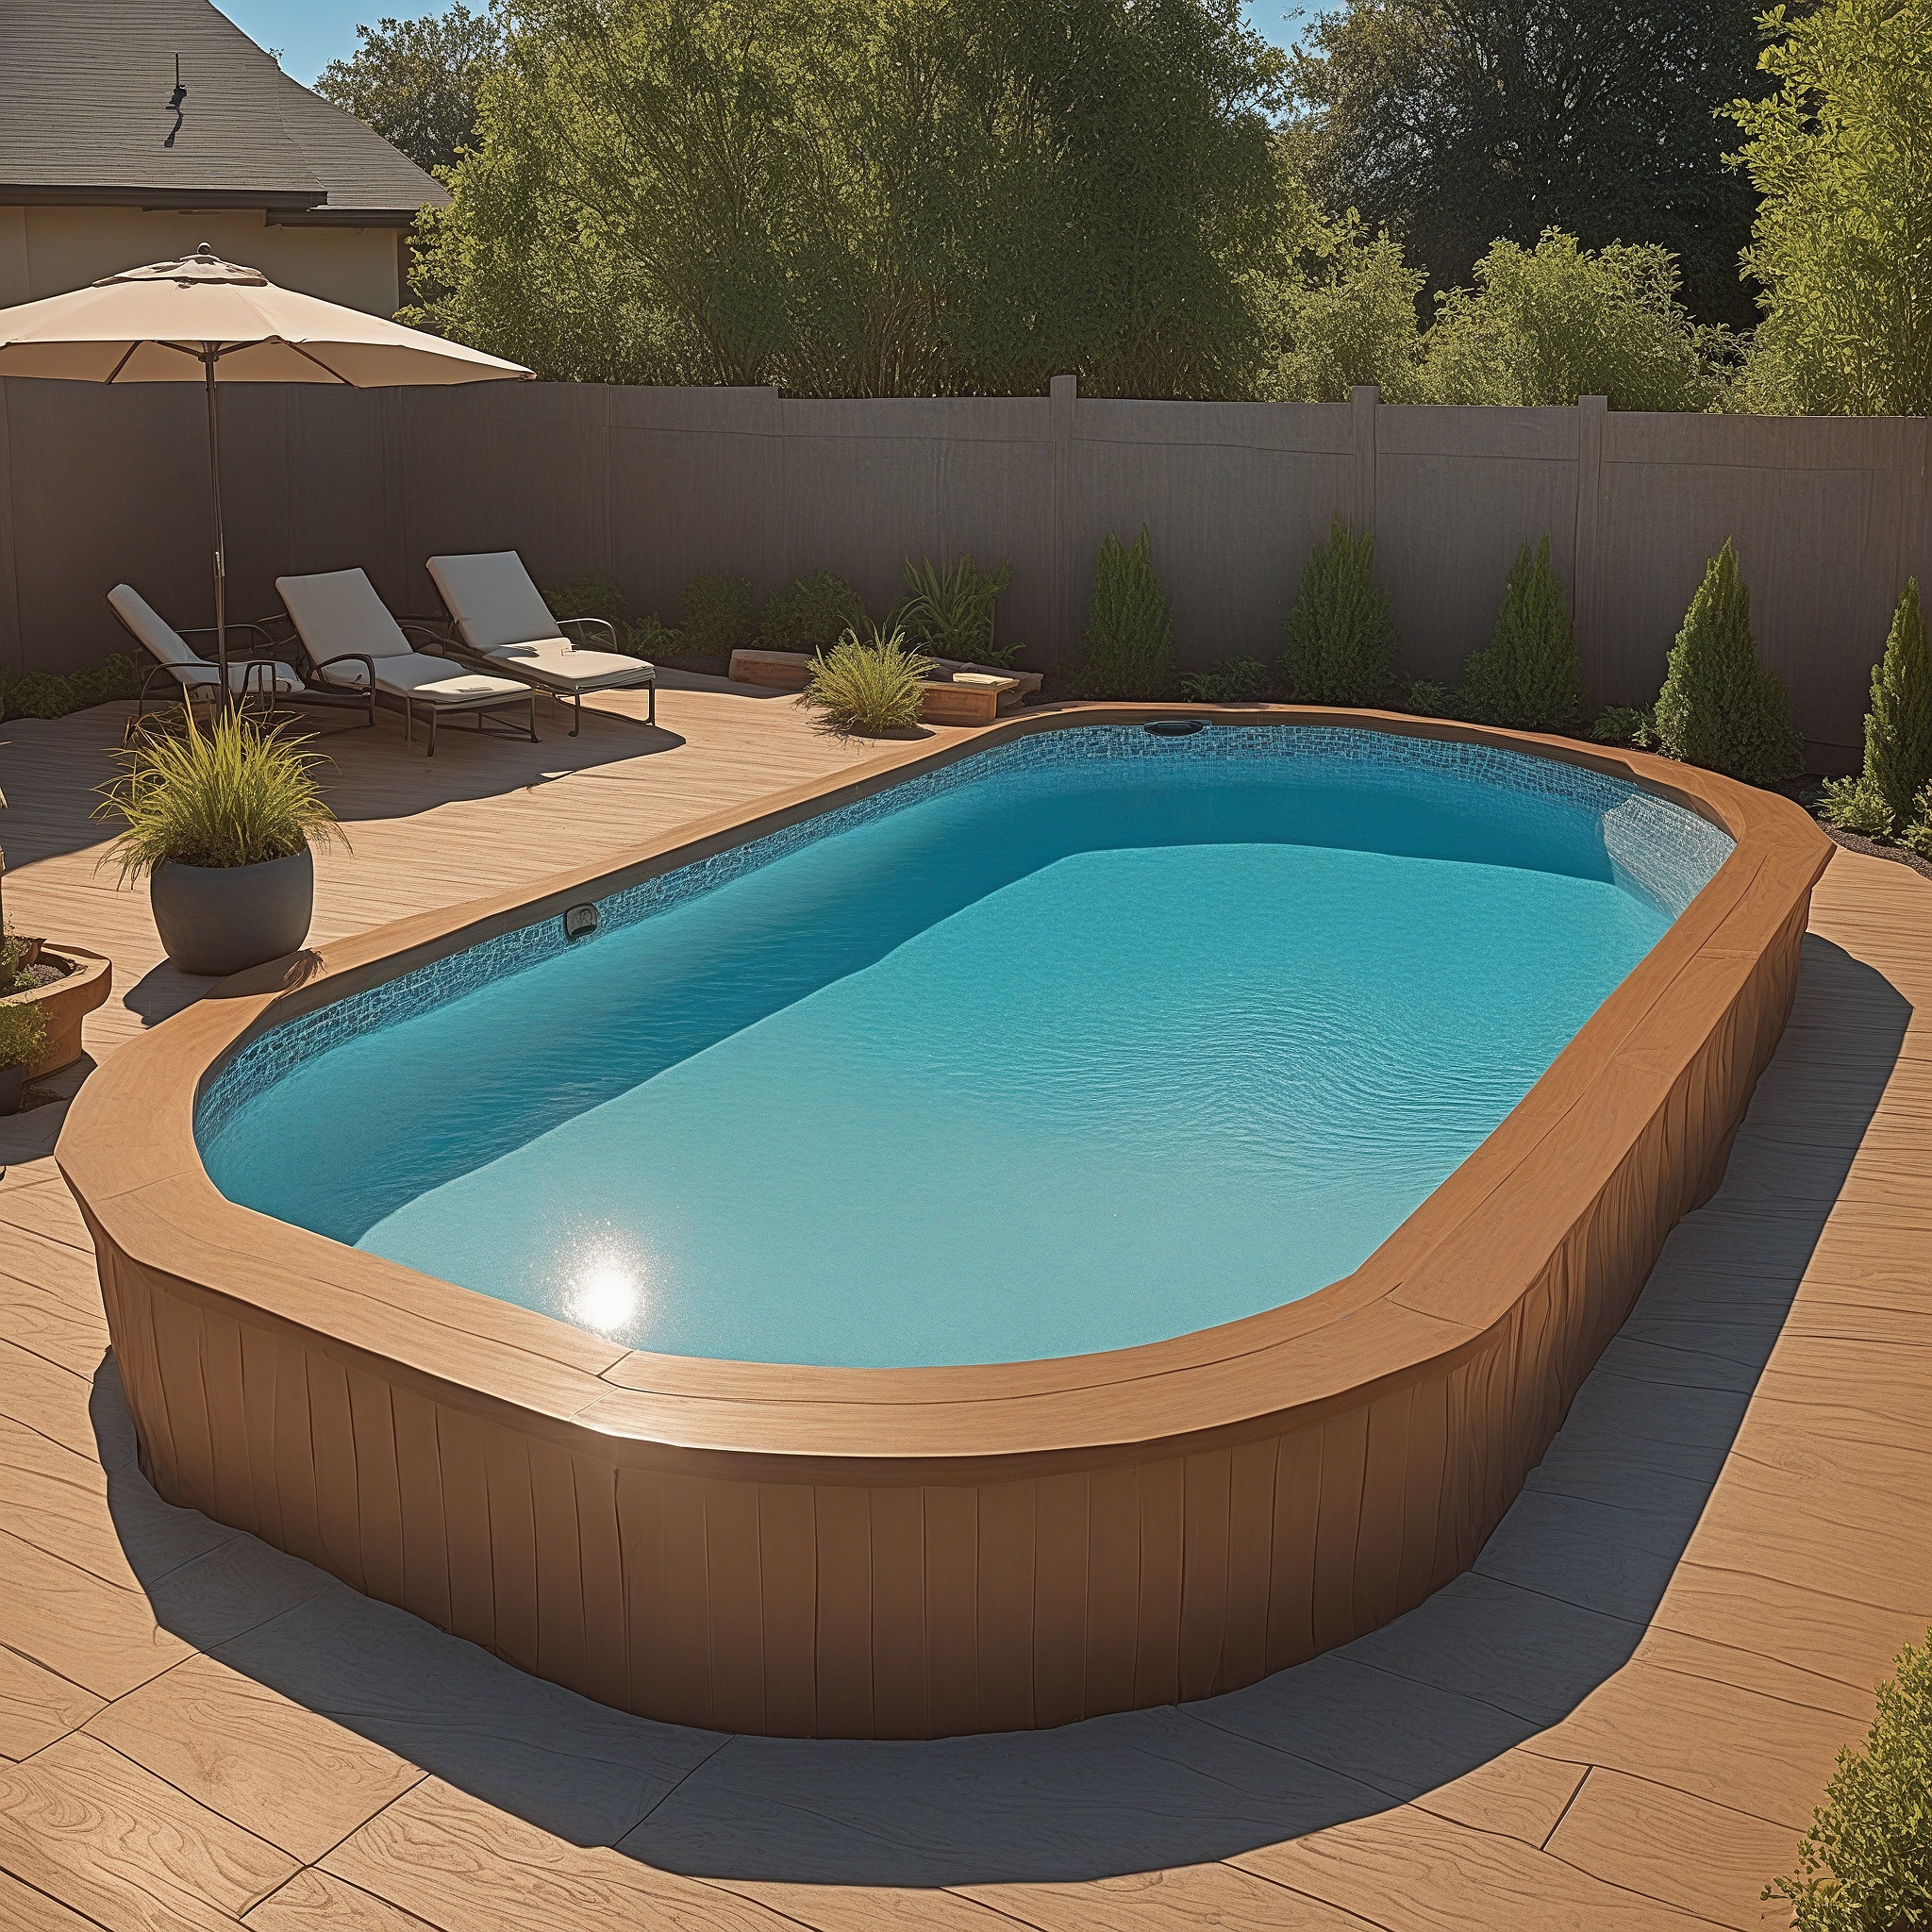 Resin Above-Ground Pool and a Surrounding Composite Deck With Outdoor Seating